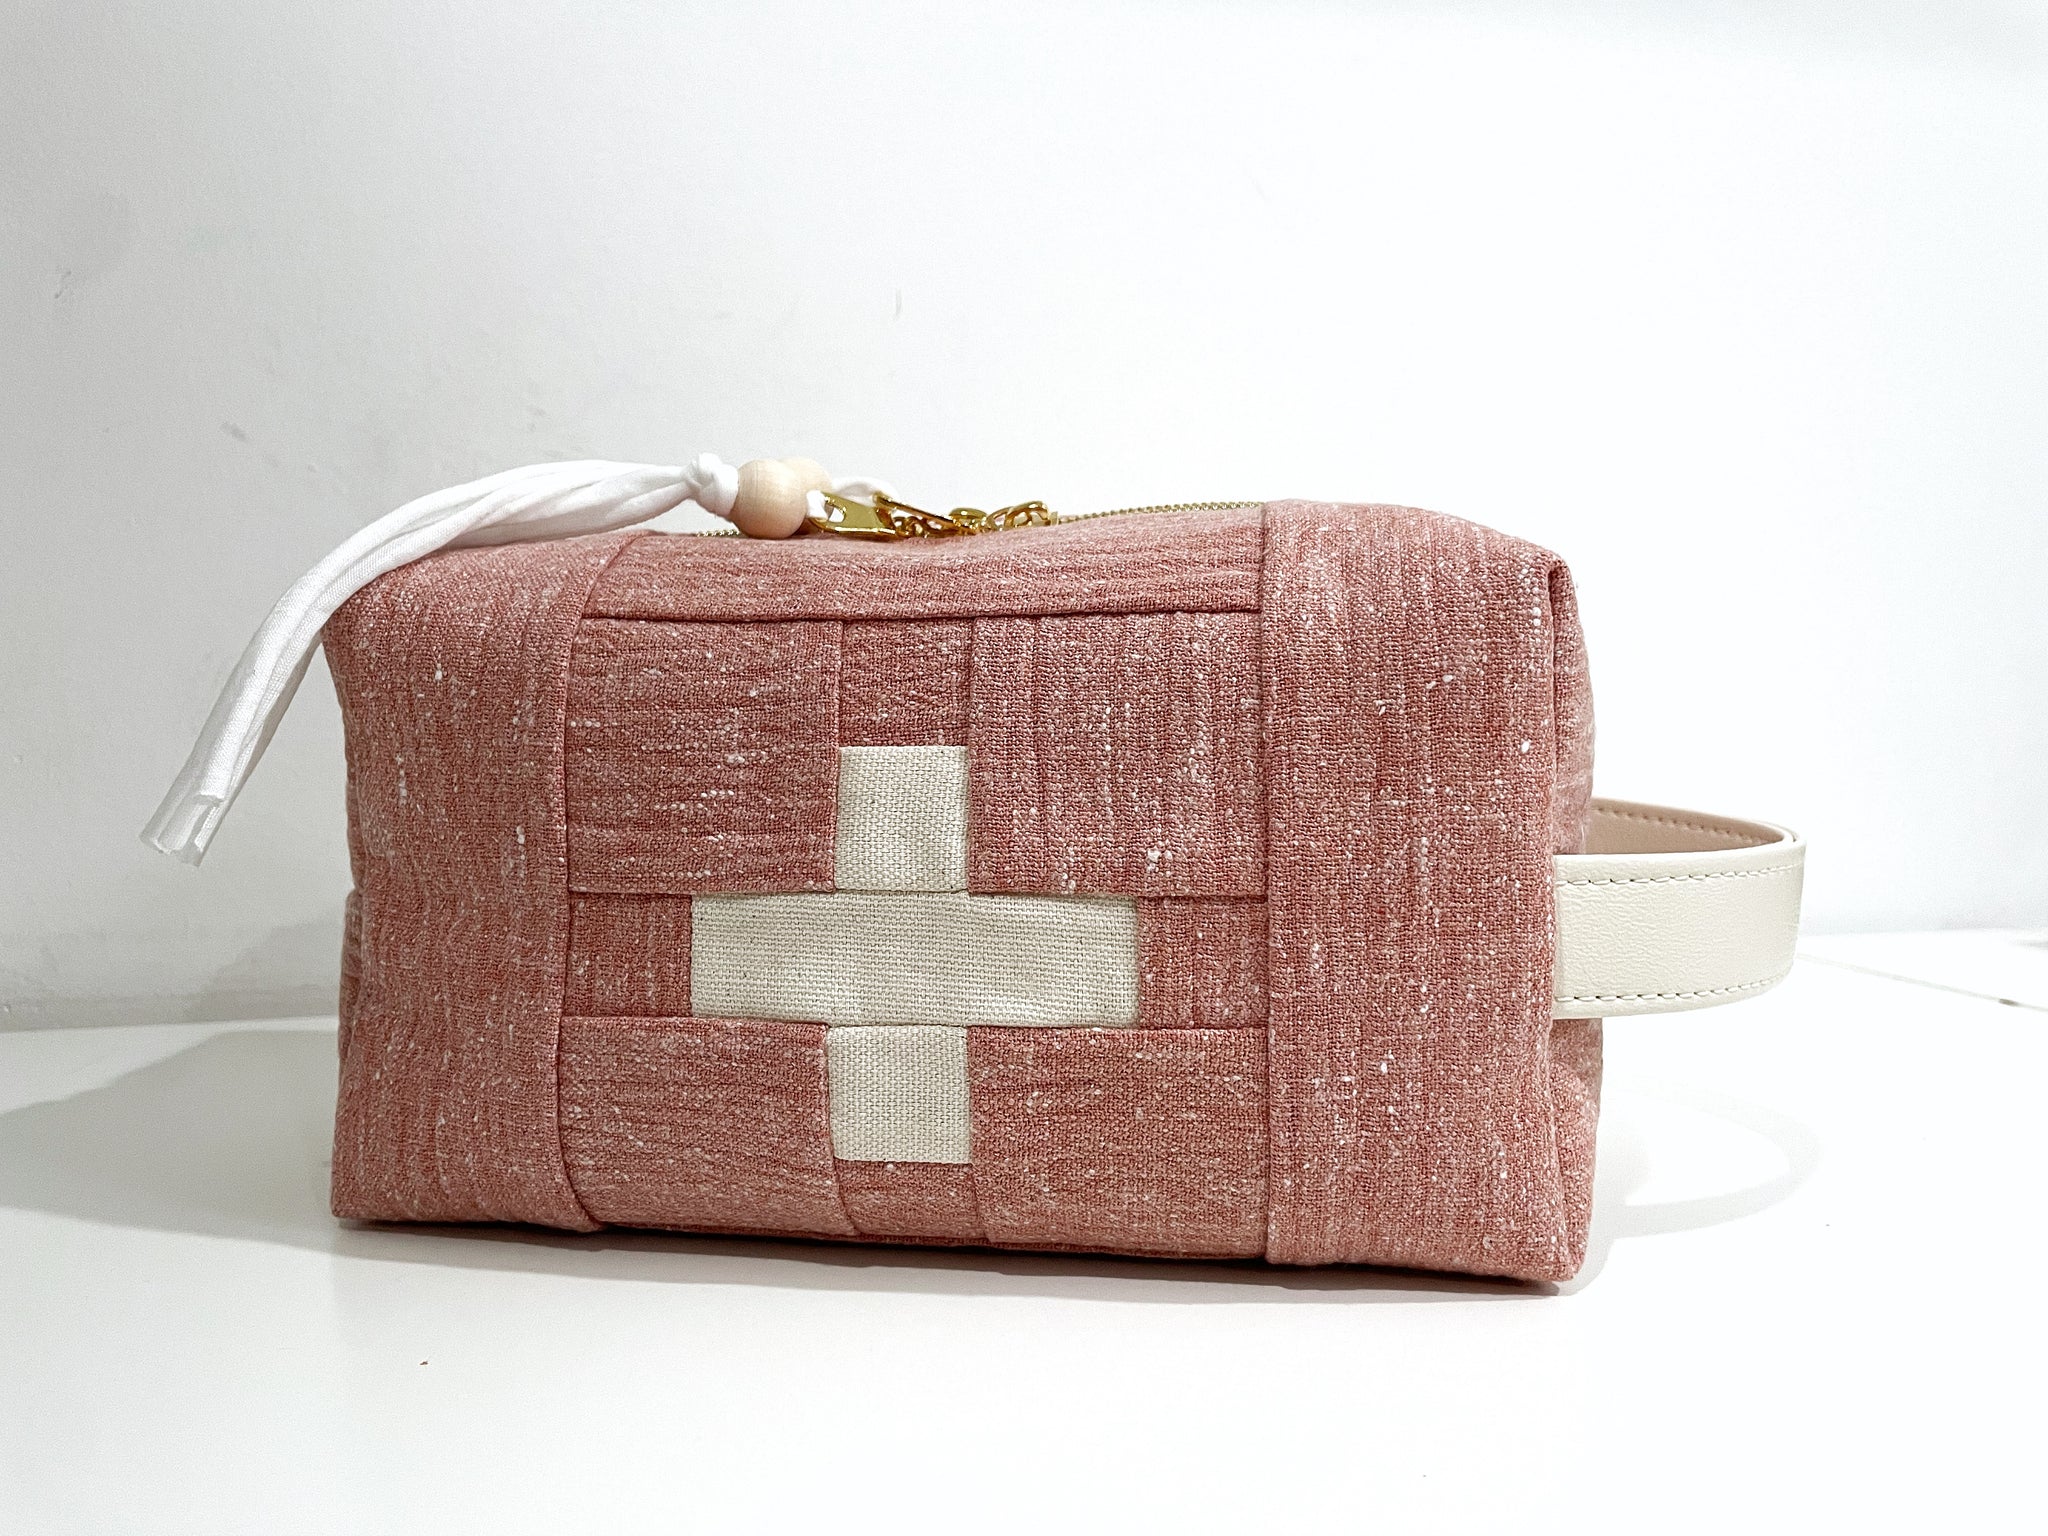 Boxy Medicine Bag | Red & Ivory First Aid